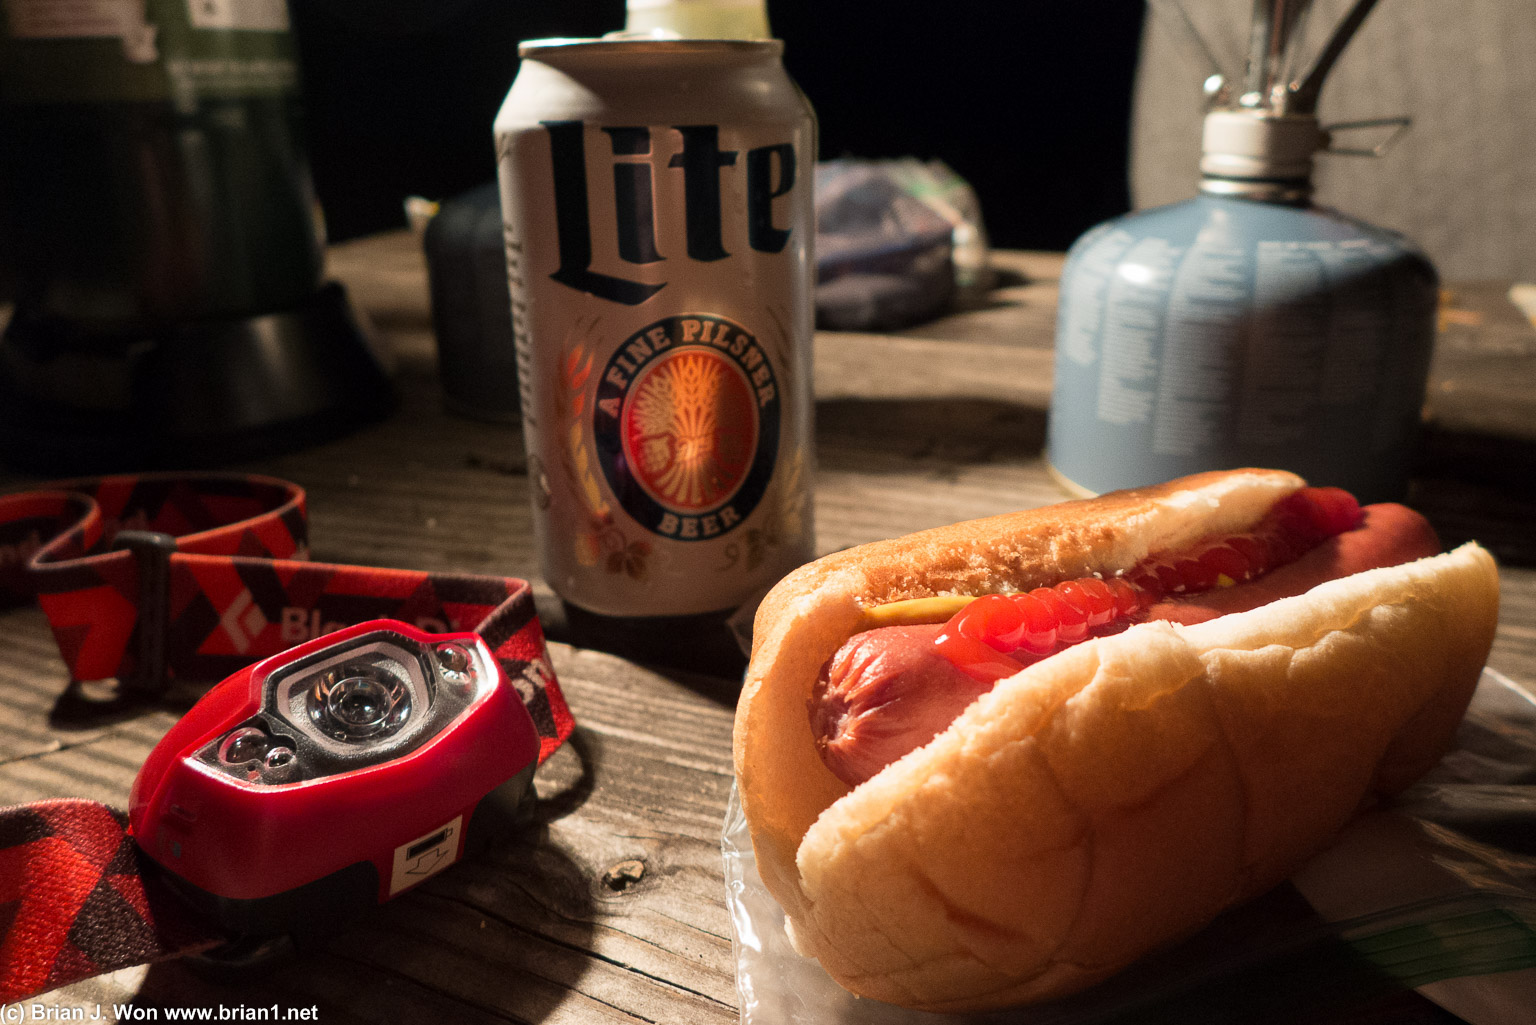 Hot dog and Miller Lite, it's what's for dinner.